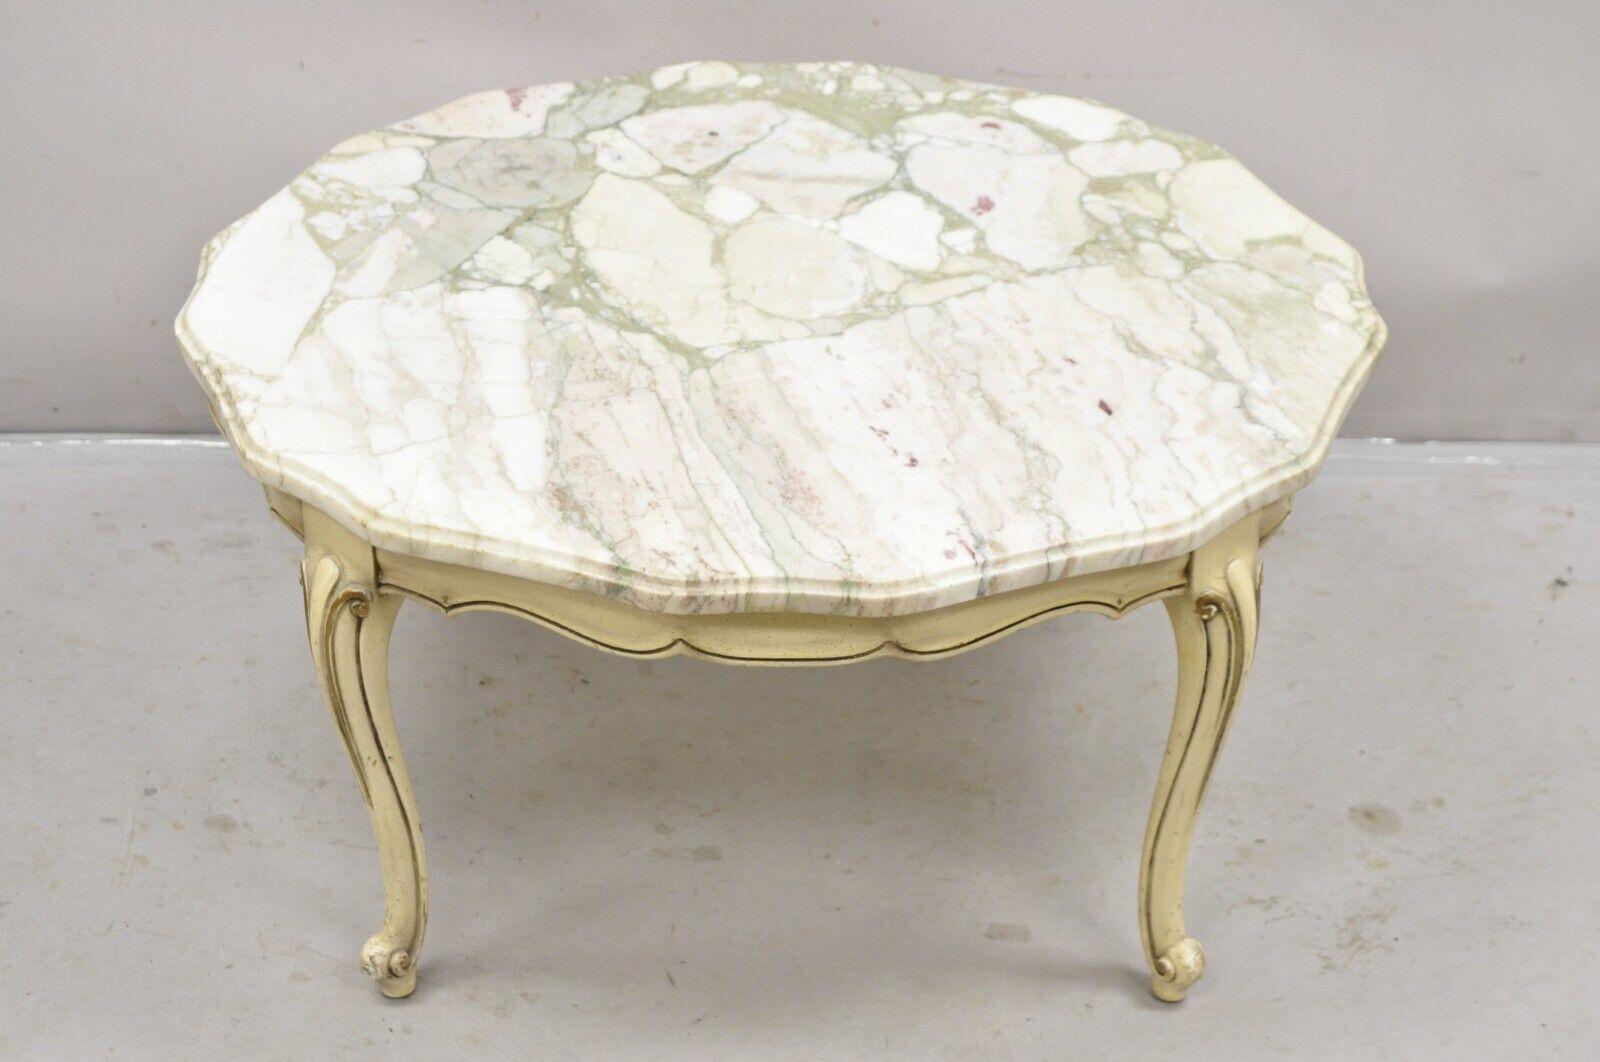 Vintage French Provincial Style Marble Top Cream Painted Round Coffee Table For Sale 2